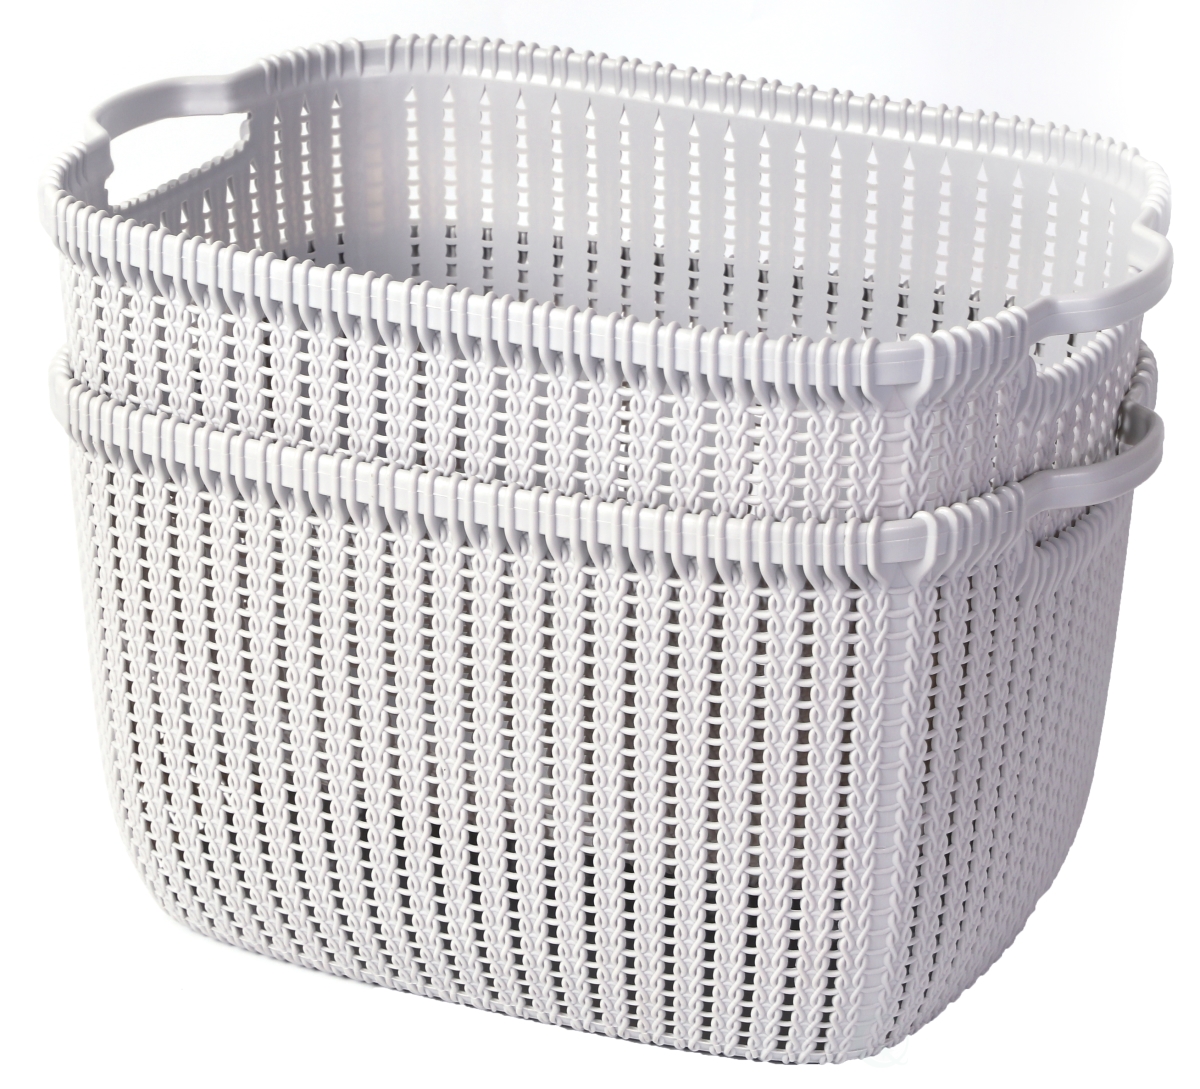 Picture of Basicwise QI003399.2 8.5 x 16 x 11 in. Plastic Wicker Basket&#44; Grey - Large - Set of 2